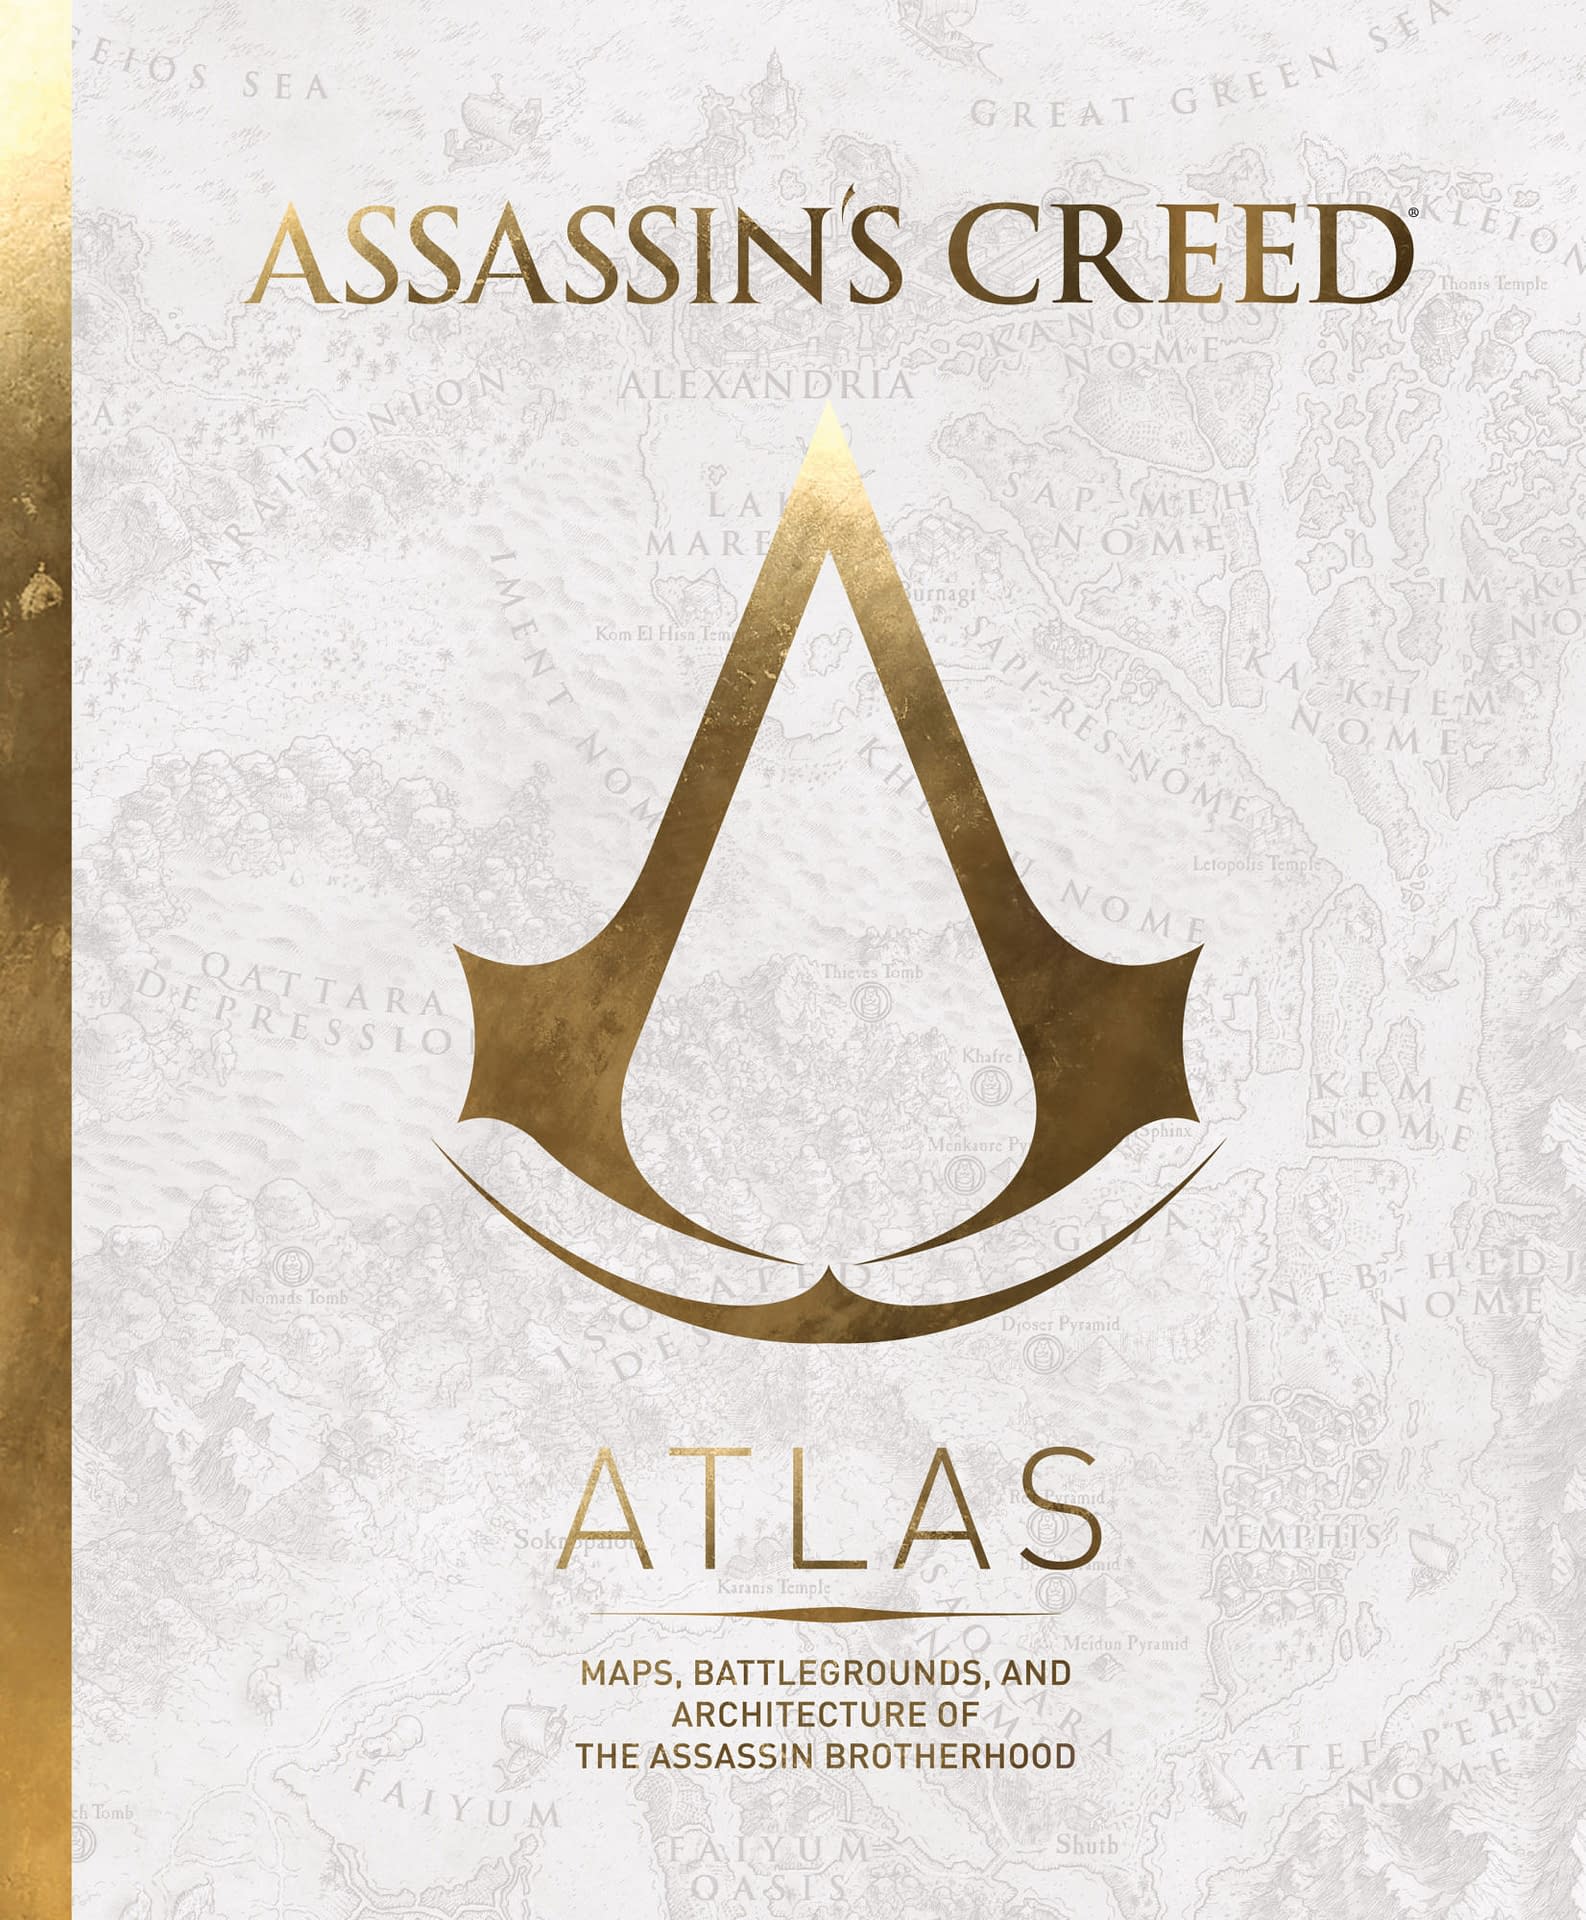 Assassin S Creed Atlas Makes For A Fun Read For Ac Fans A Review